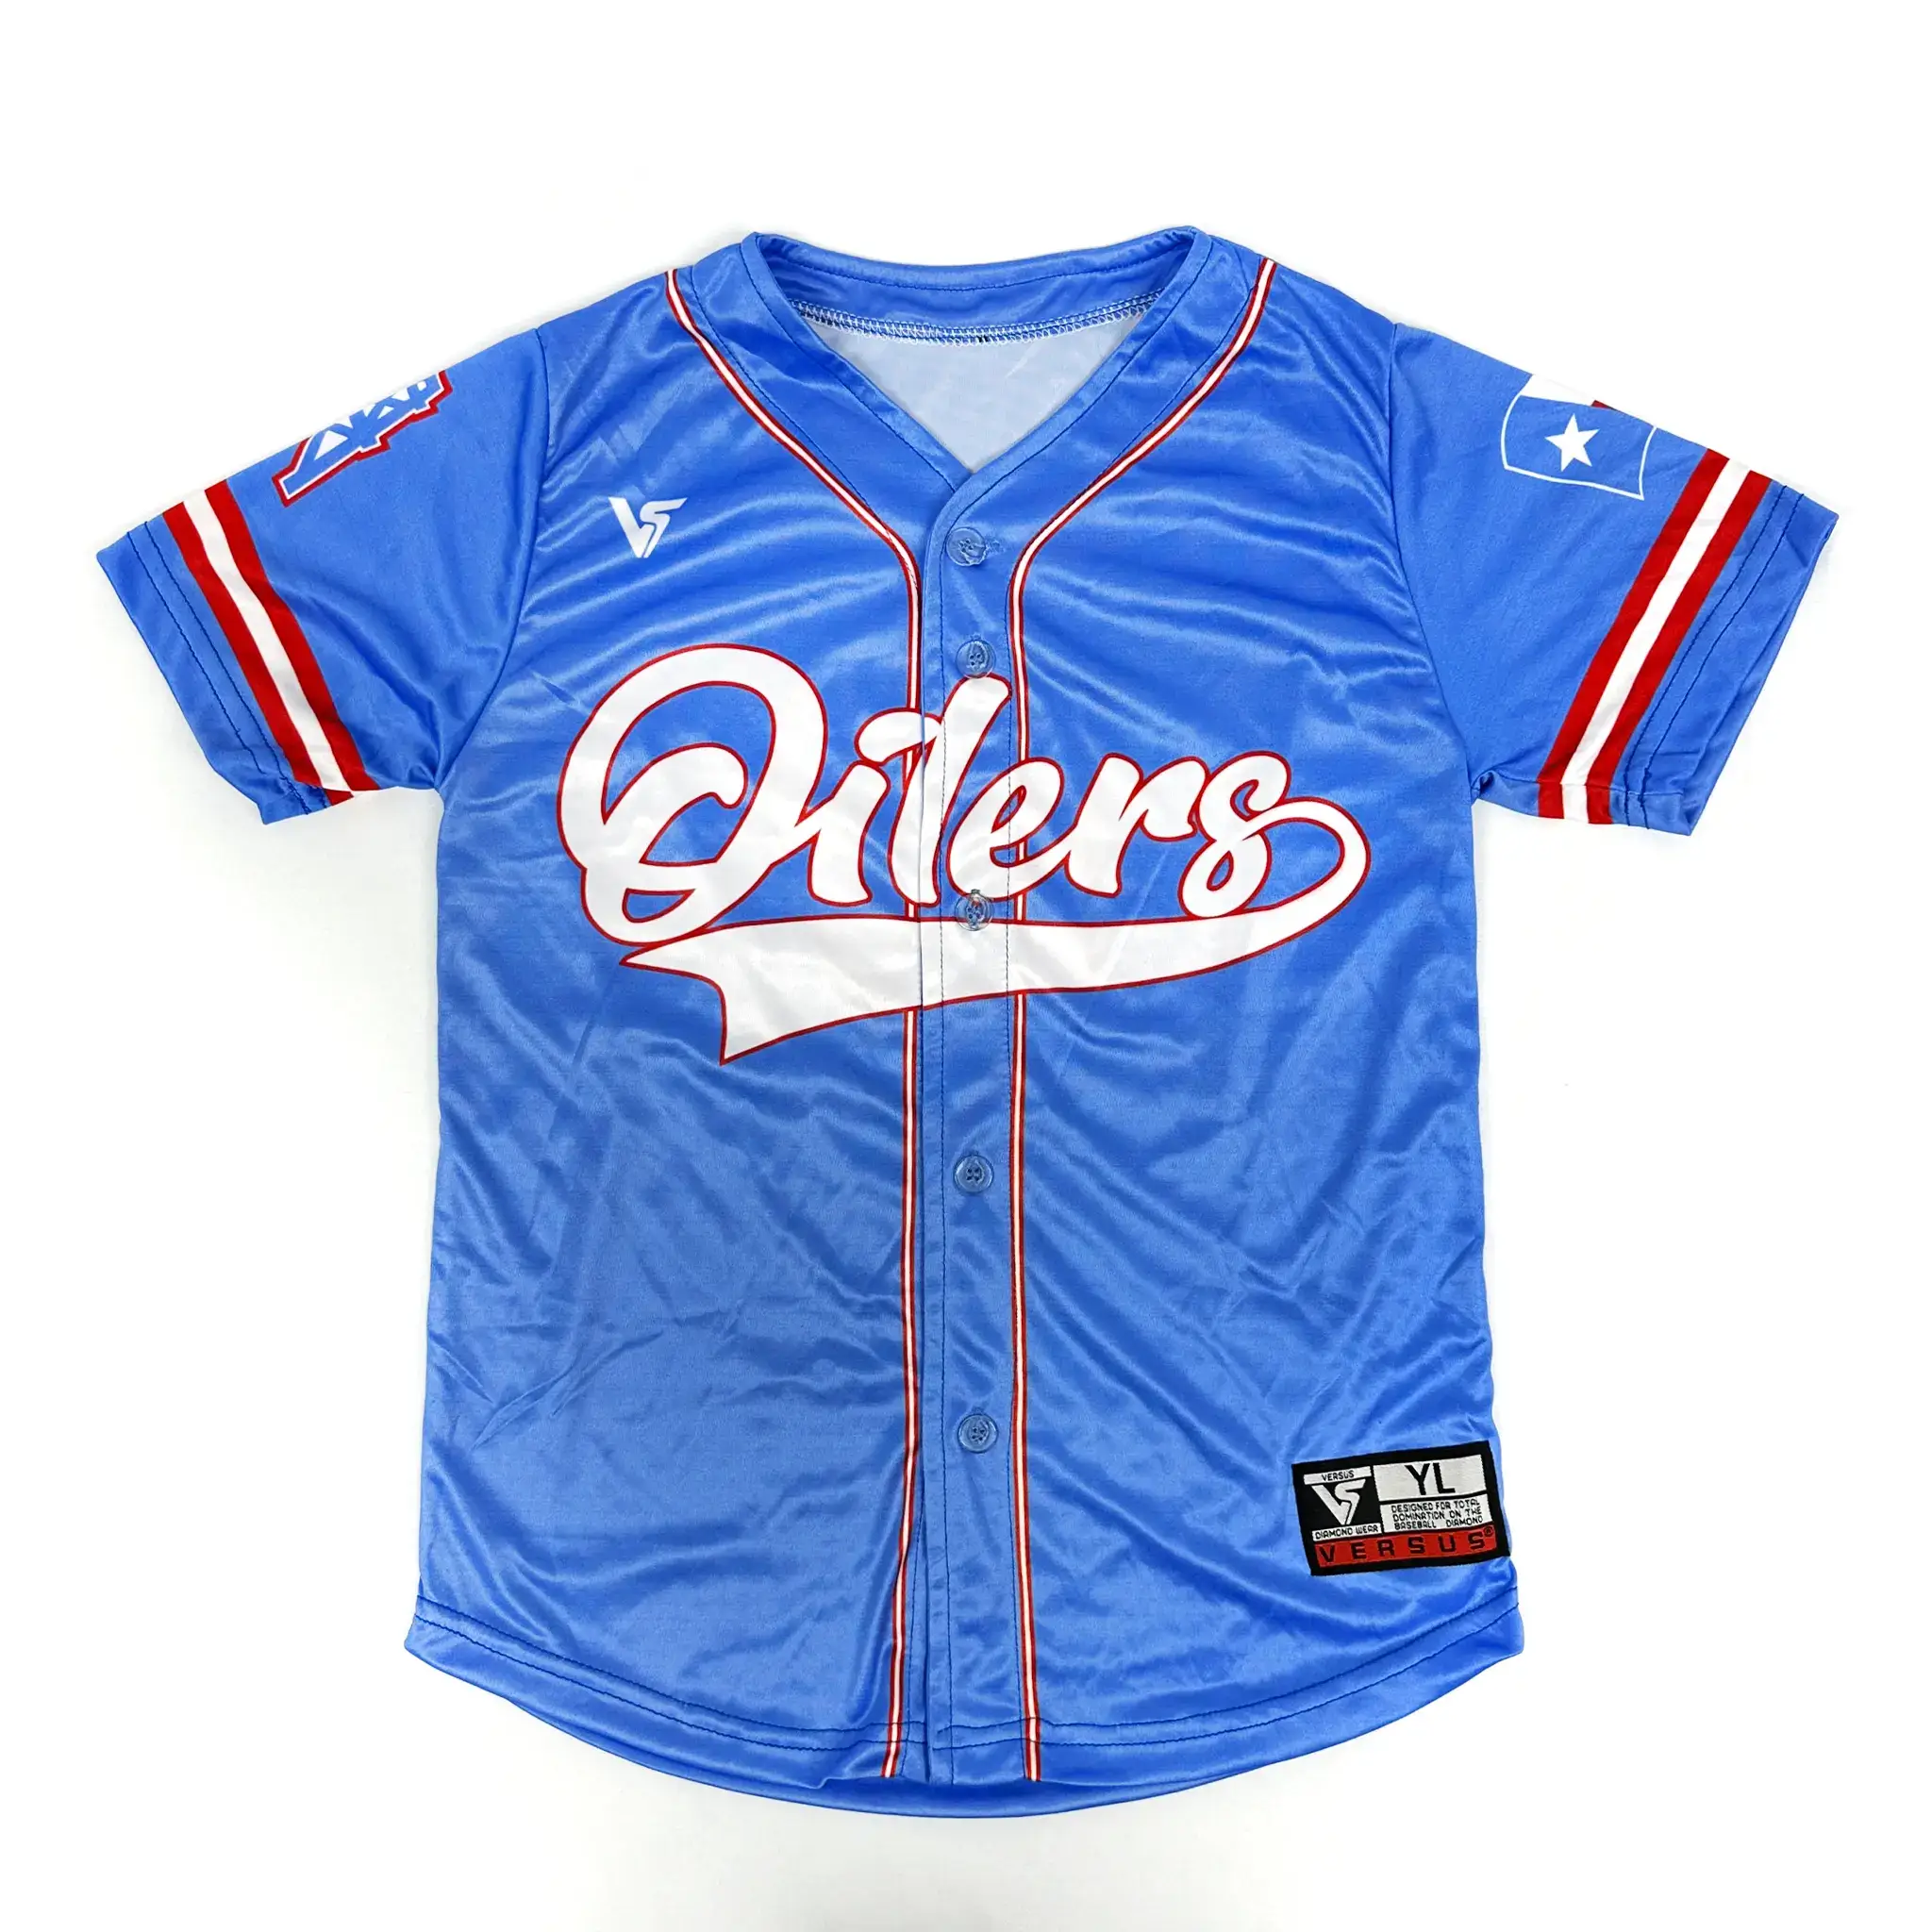 Blue Oilers Baeball Jersey